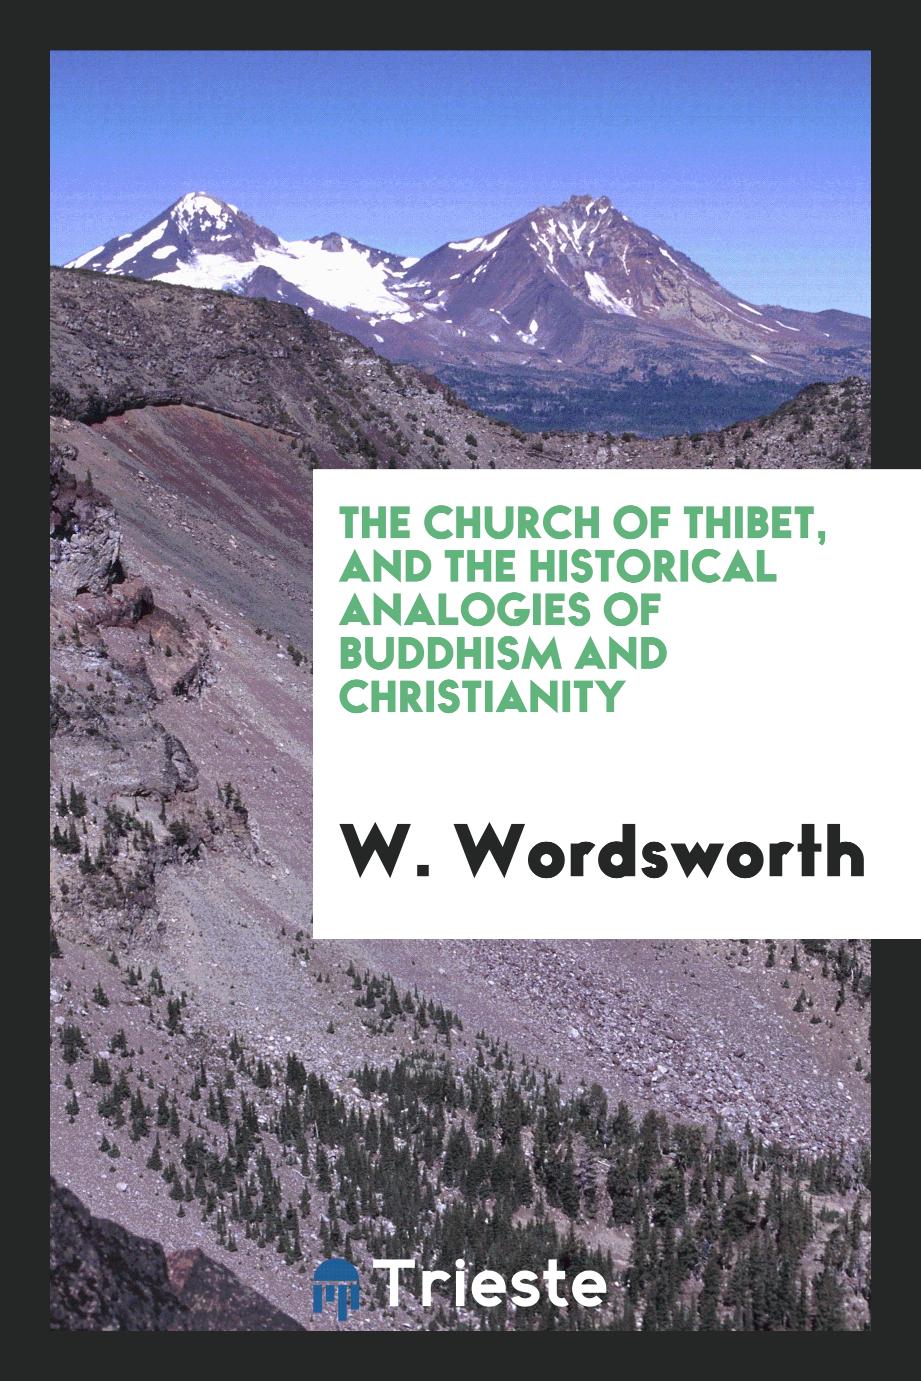 The Church of Thibet, and the Historical Analogies of Buddhism and Christianity